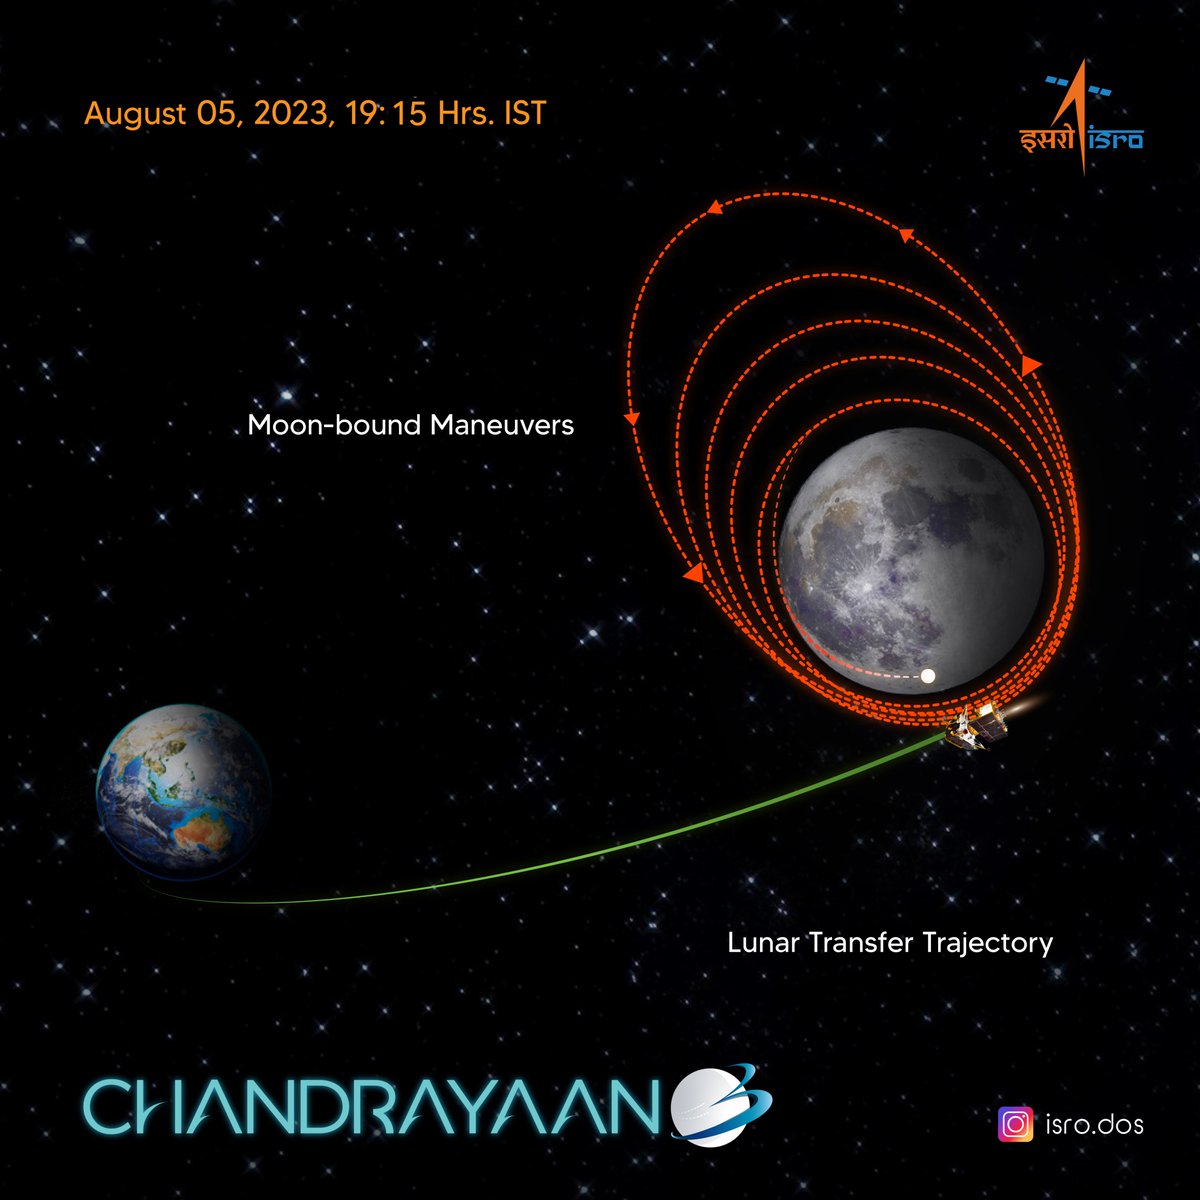 Image Chandrayaan-3 space mission enters lunar orbit